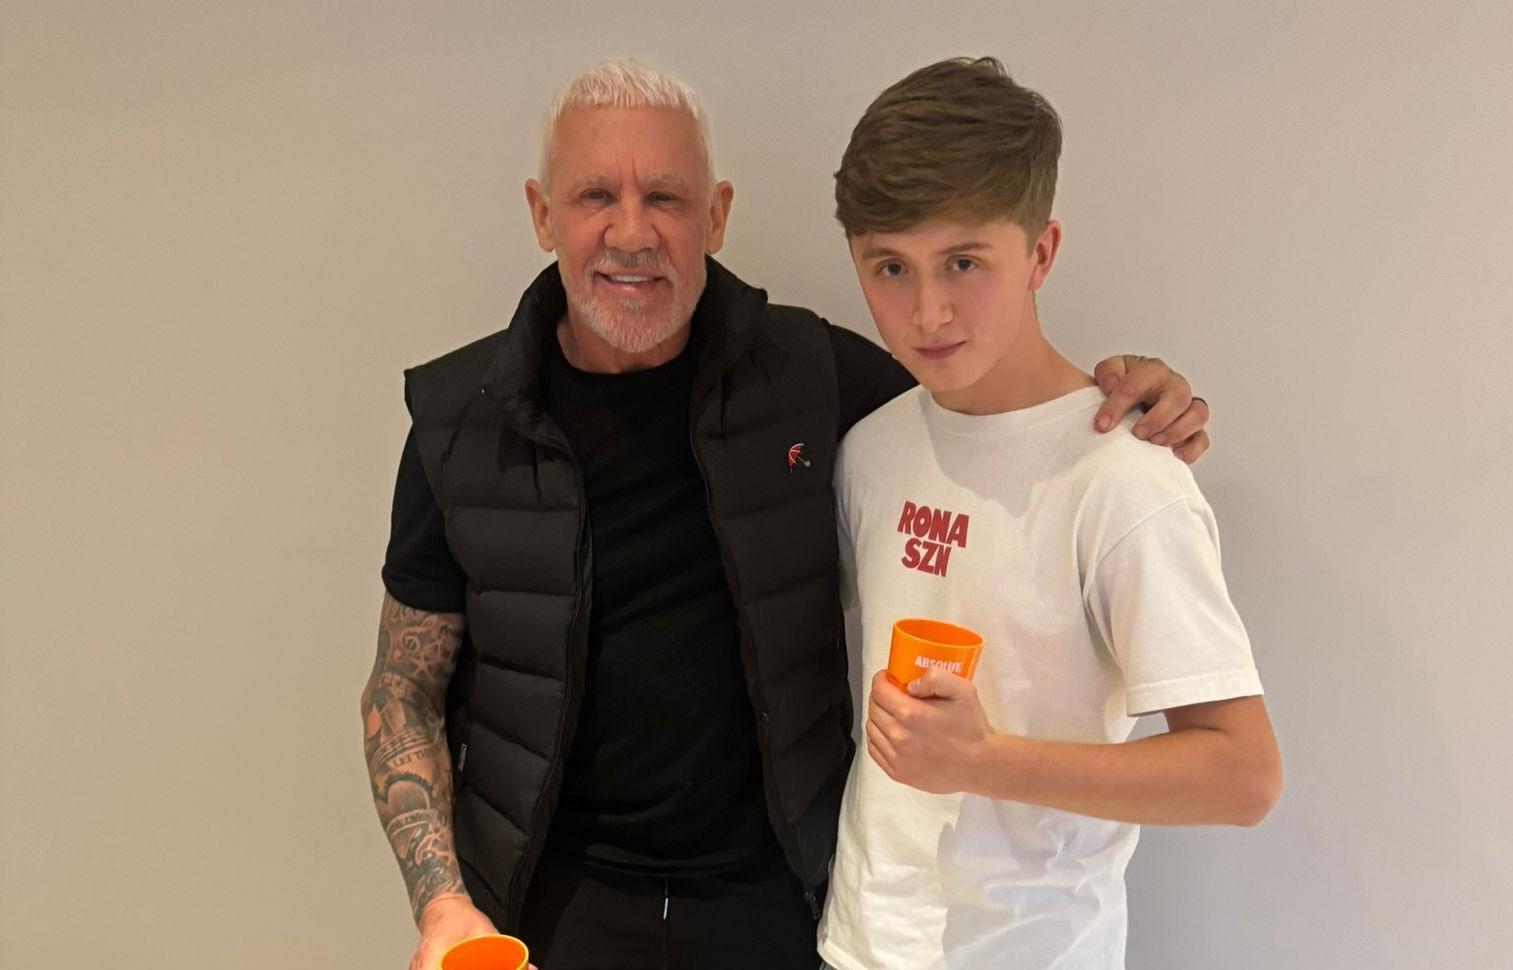 They met each other: Maurice told VG that he called Wayne Lineker because he is a well-known man who many associate with Ibiza.  They met here after the 21-year-old sent a message.